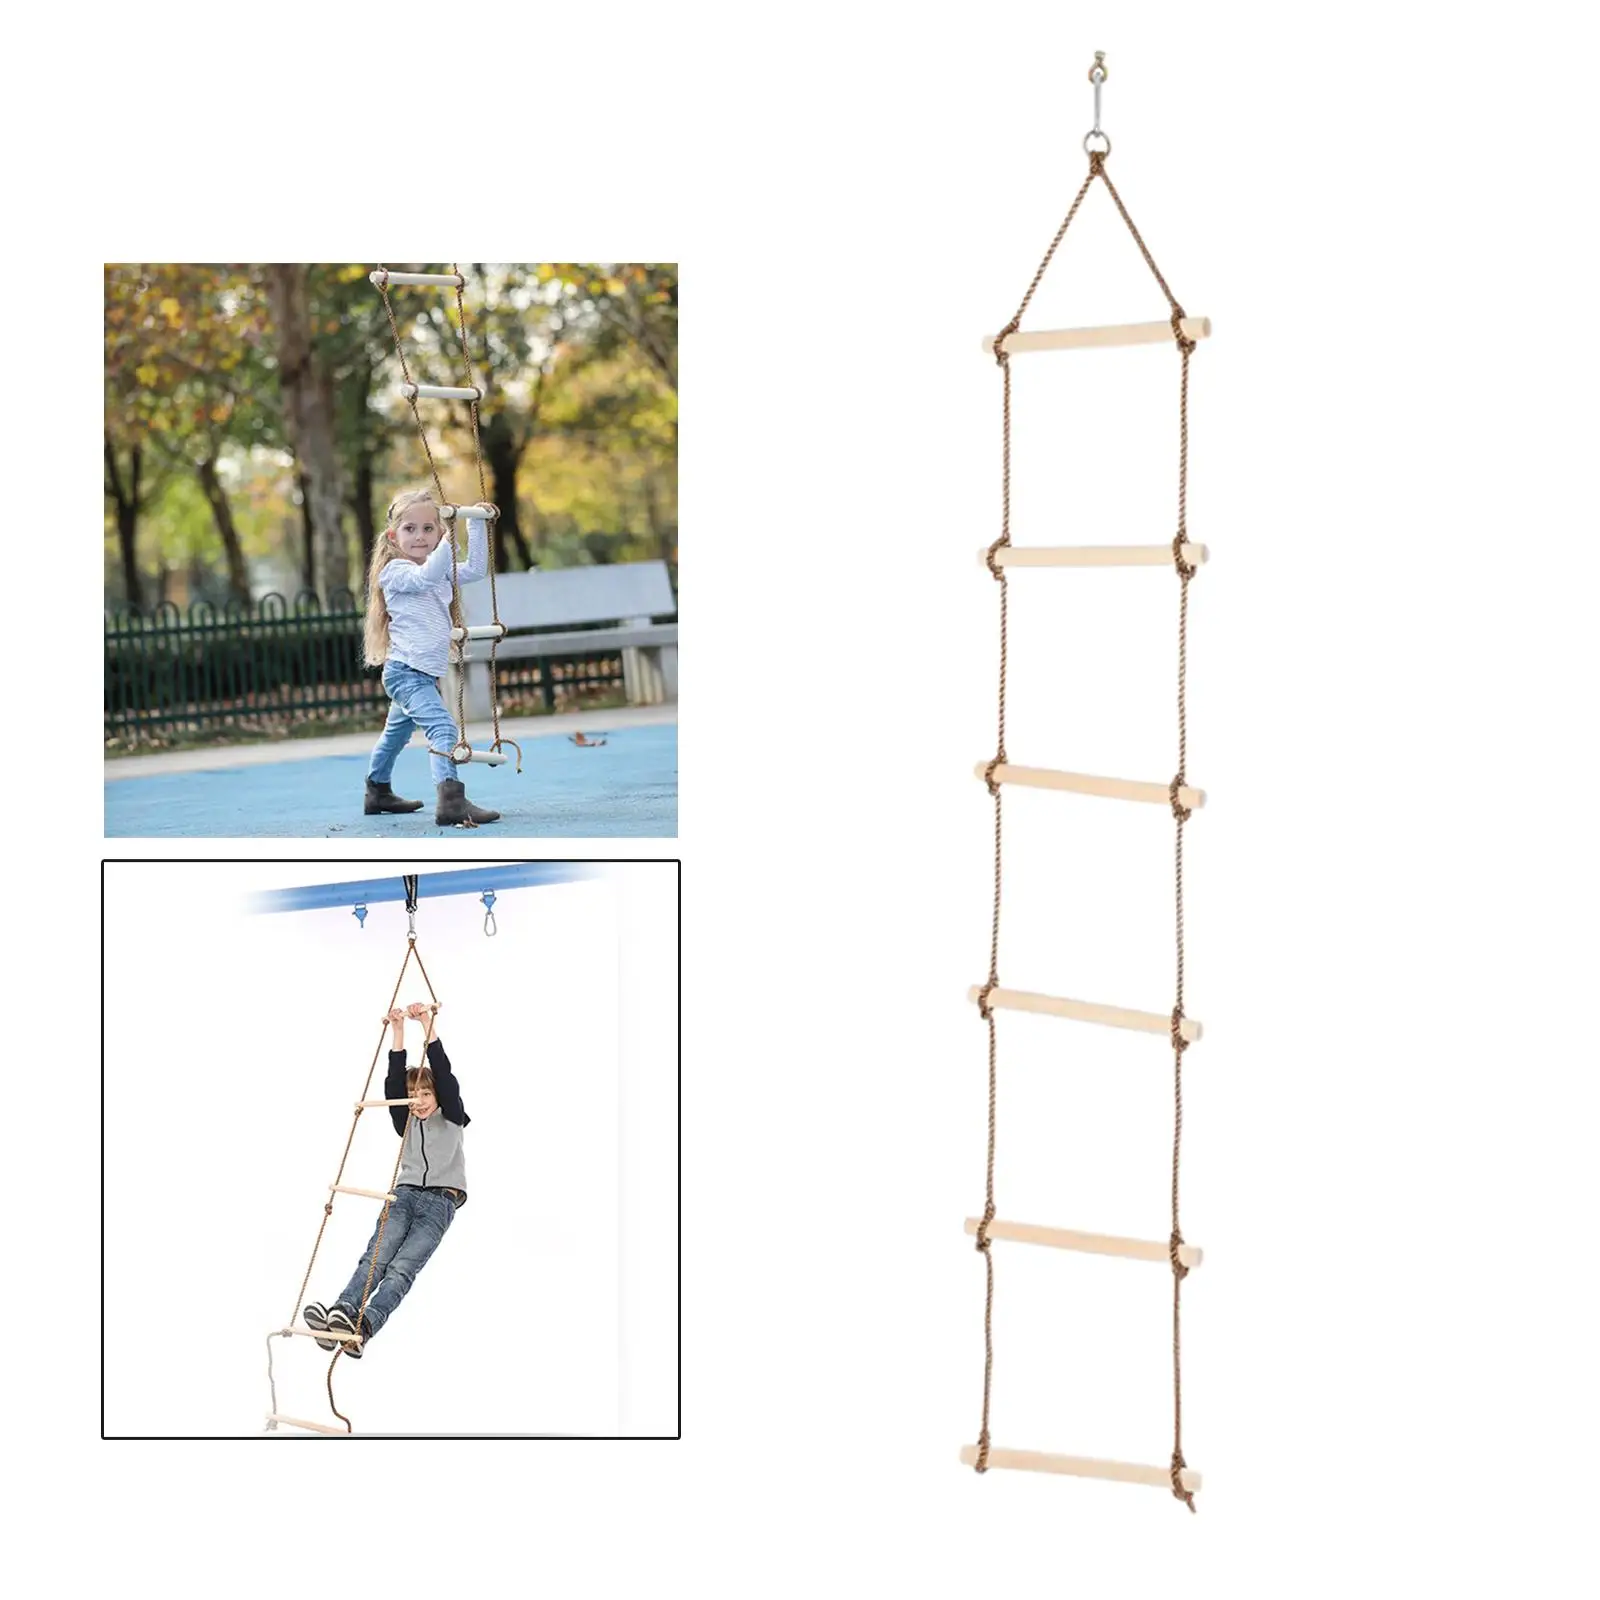 Climbing Rope Ladder Climbing Game Wooden for Backyard Outdoor Playground